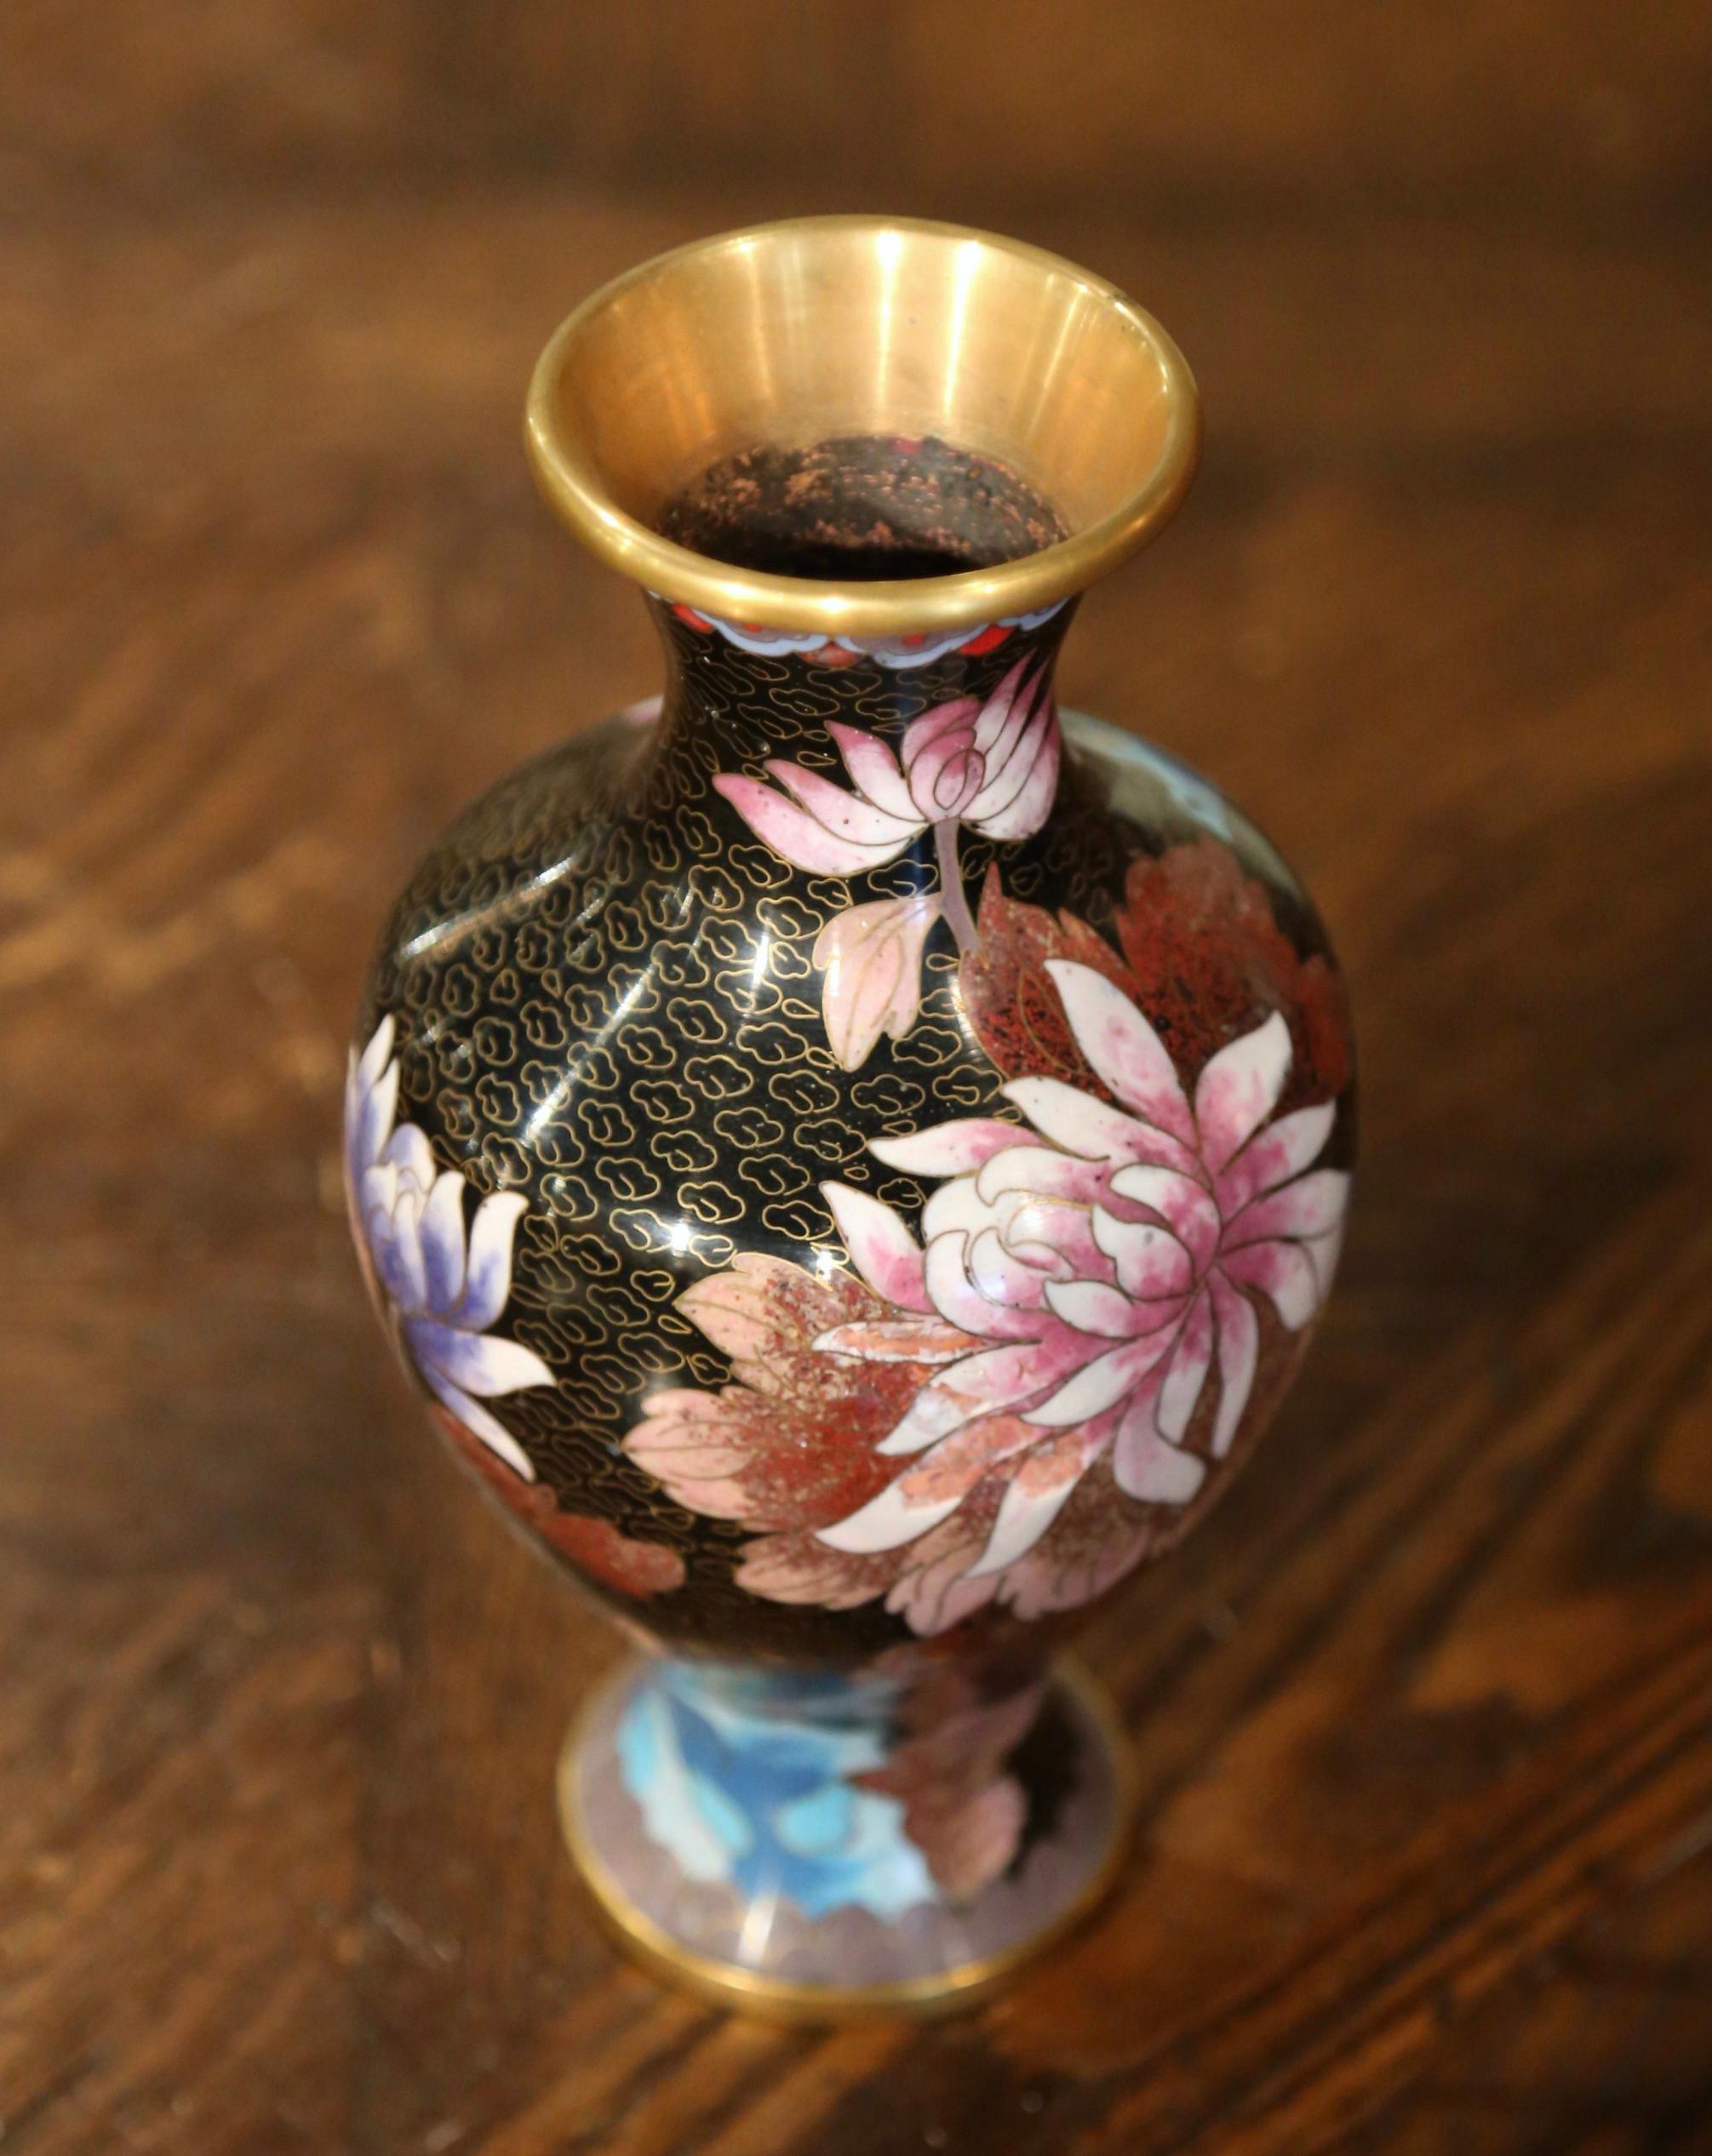 Decorate a table or a buffet with this colorful baluster vase. Created in China circa 1980, the vase features floral and leaf motifs in the cloisonné technique (decorative work in which enamel, glass, or gemstones are separated by strips of